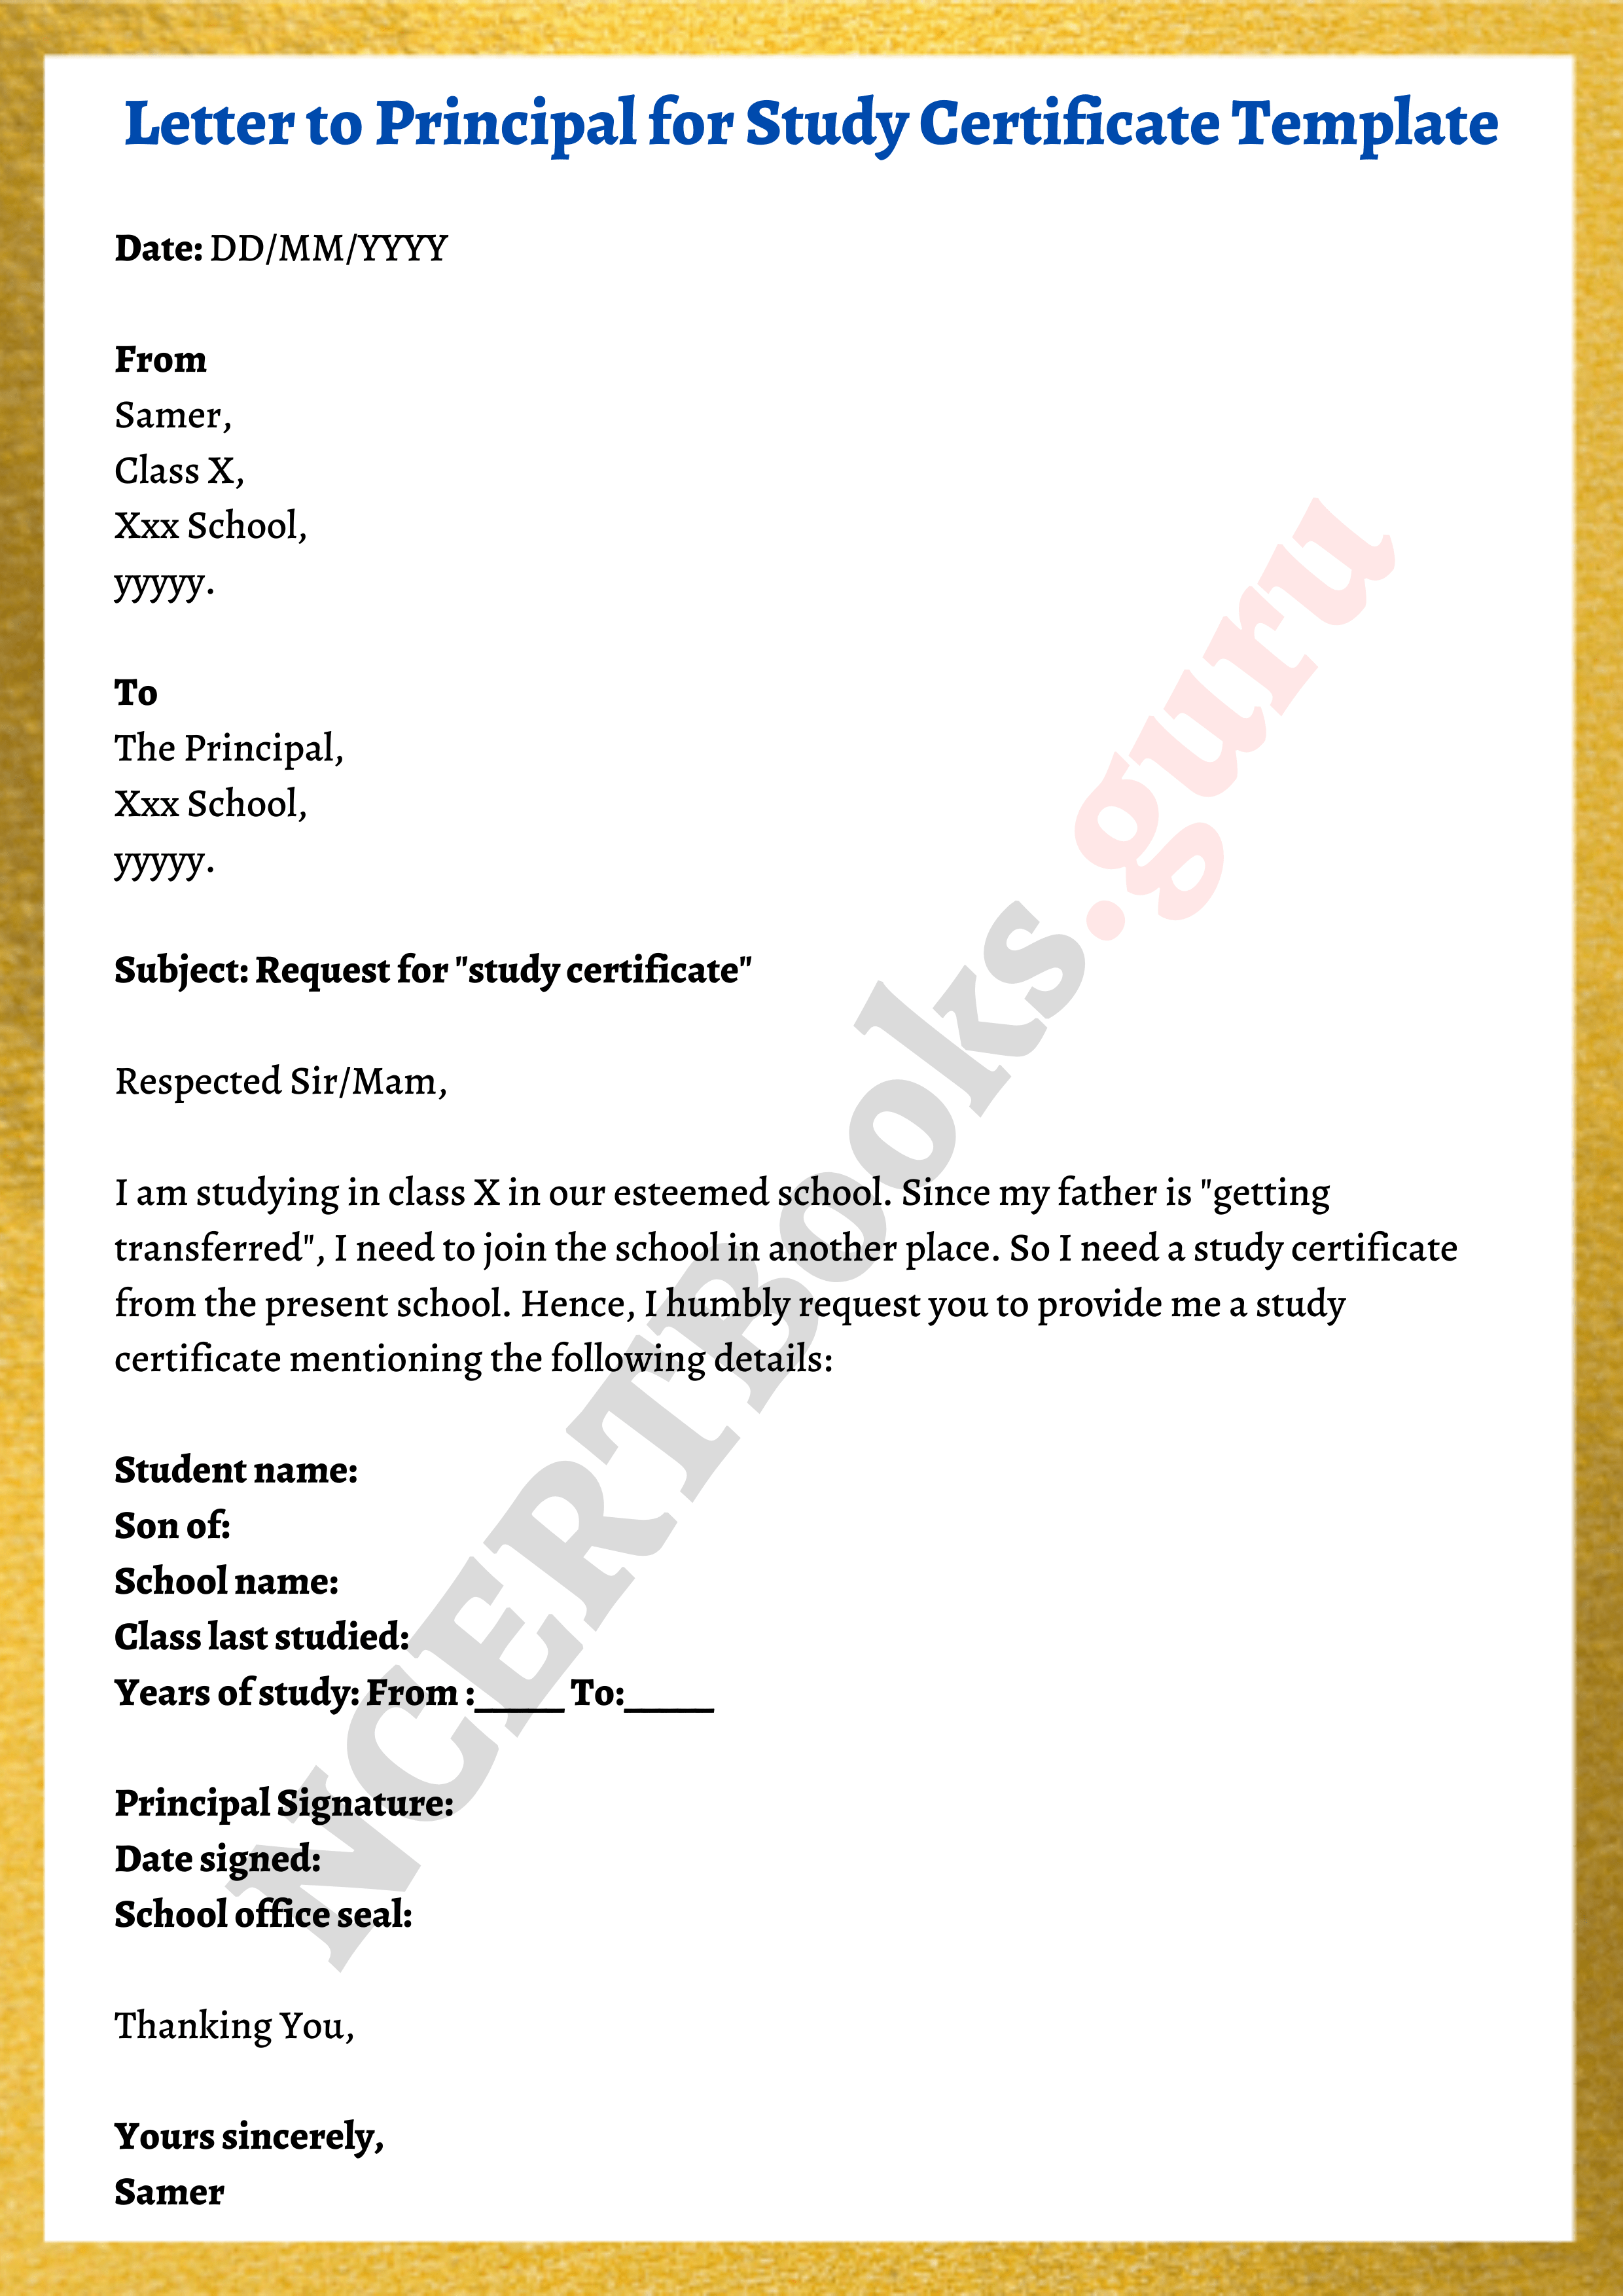 letter to principal template